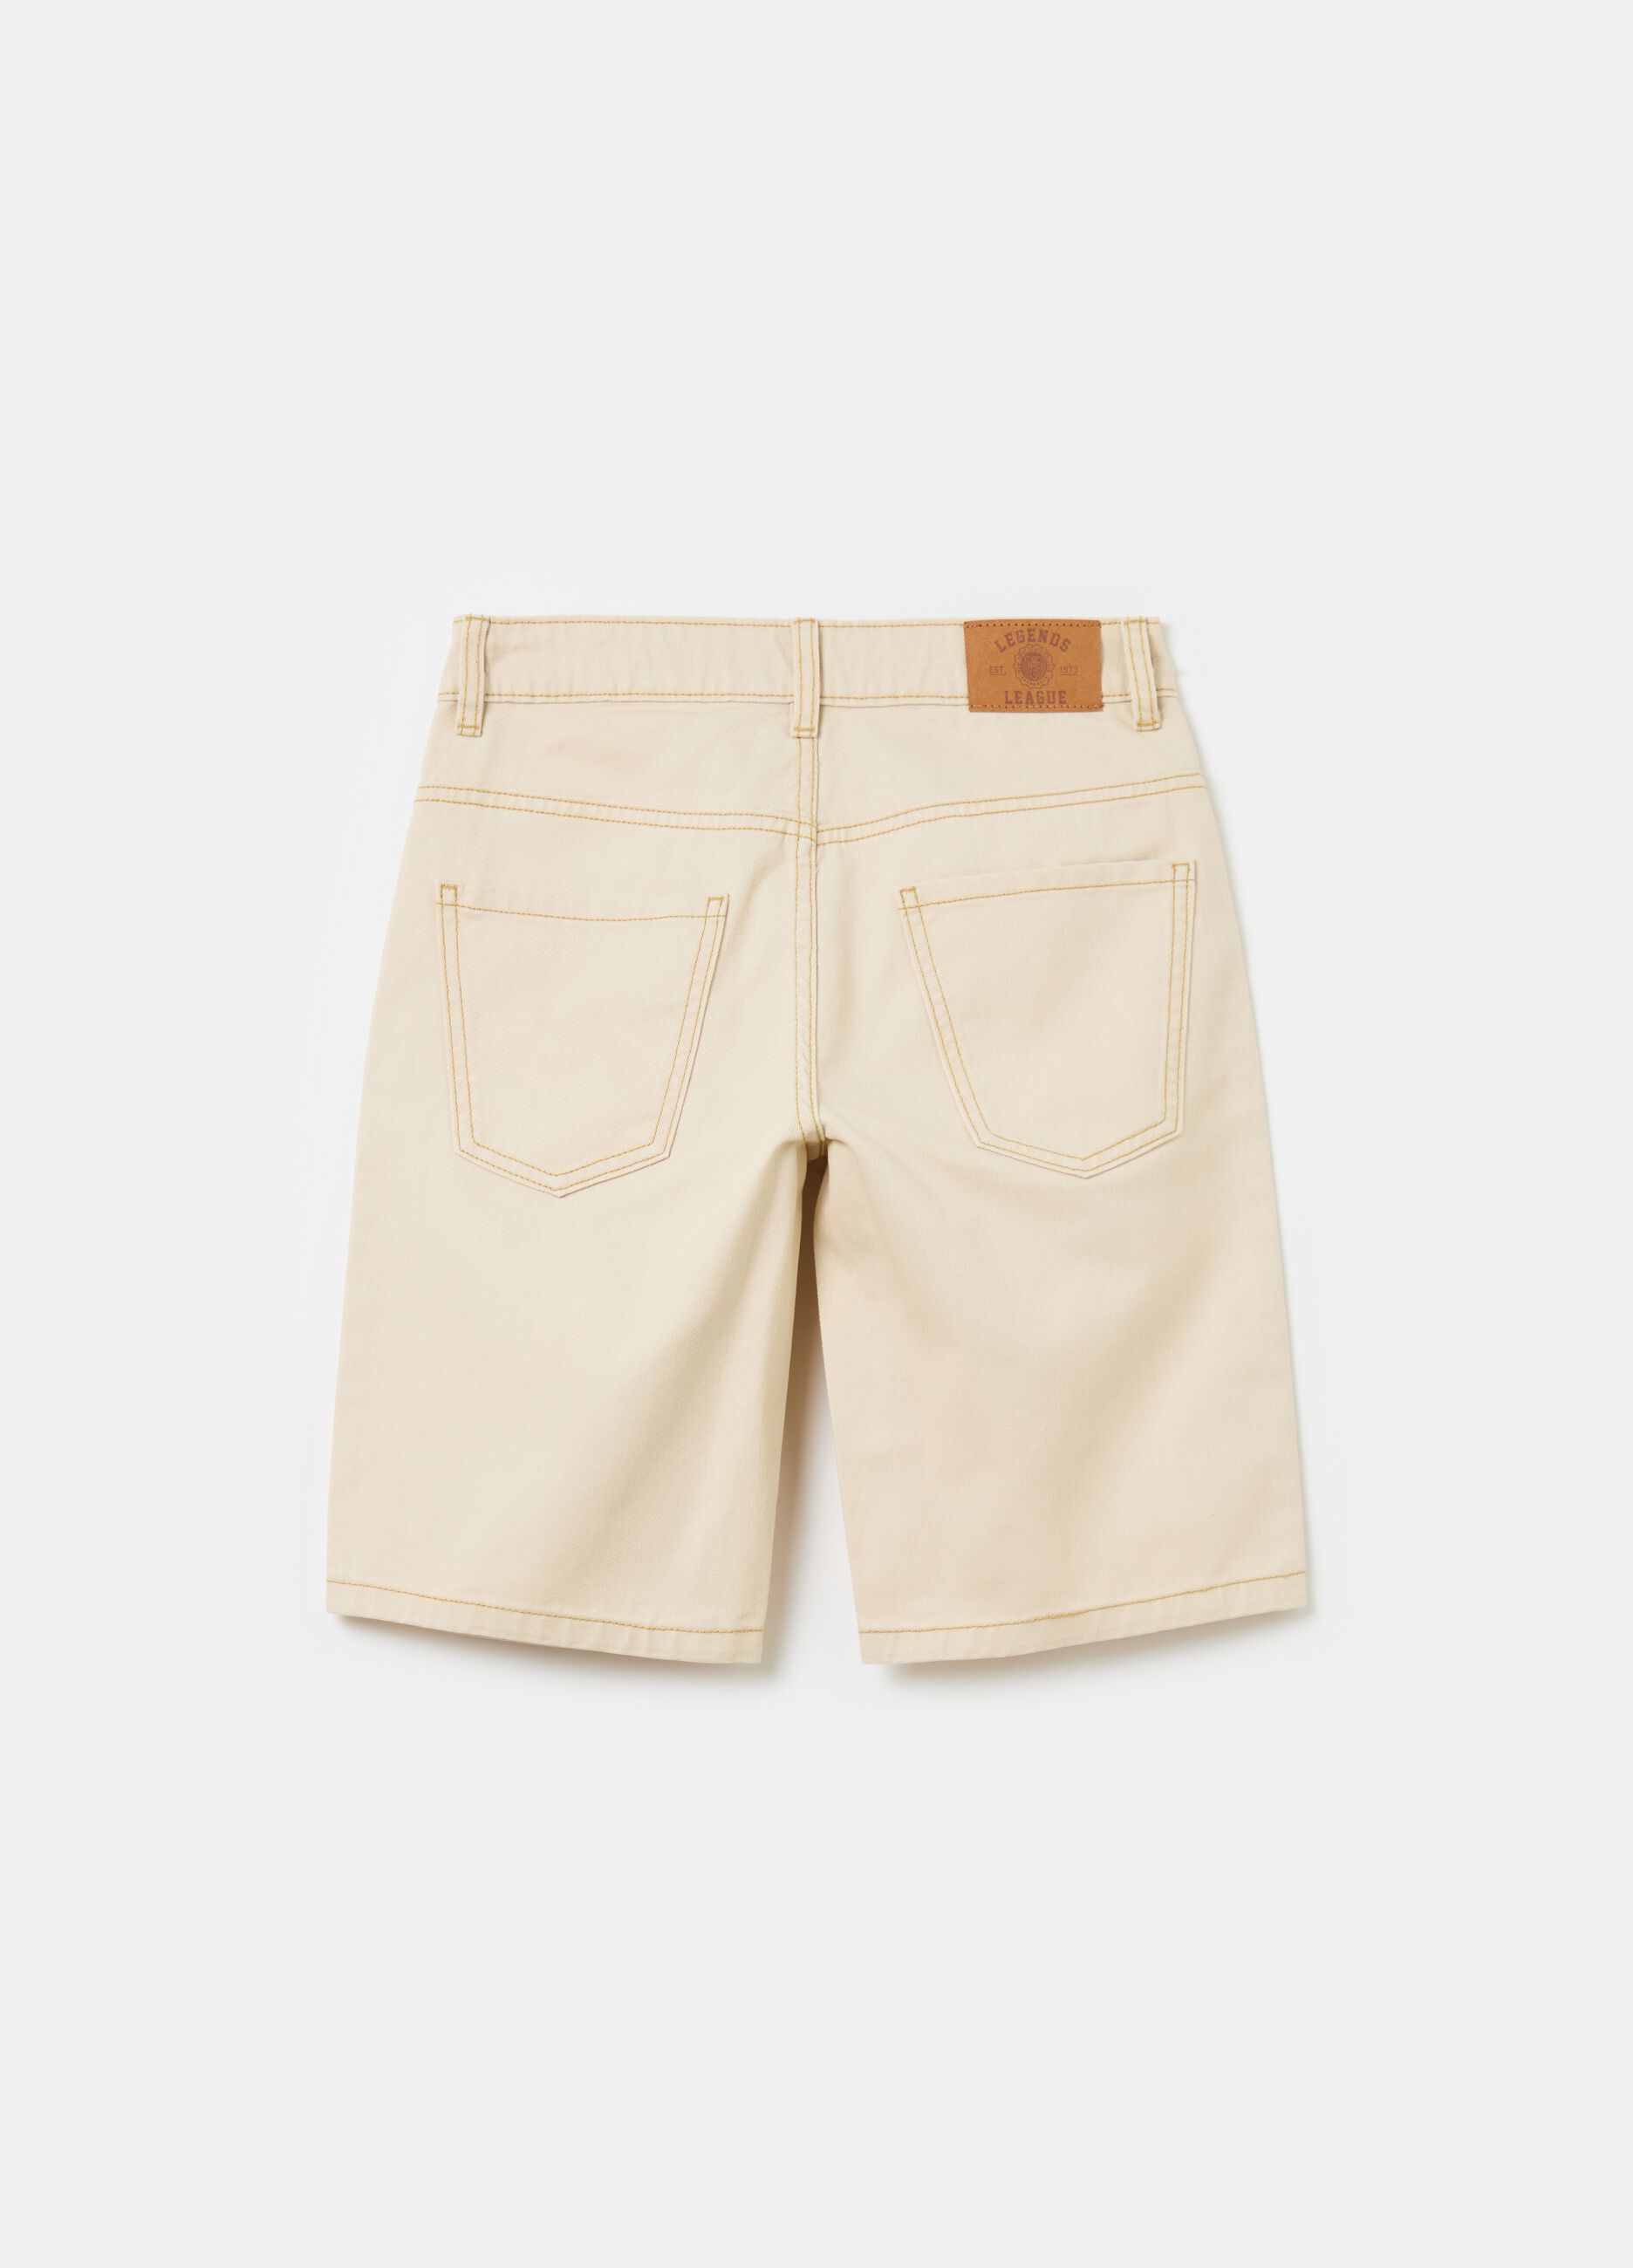 Cotton Bermuda shorts with five pockets